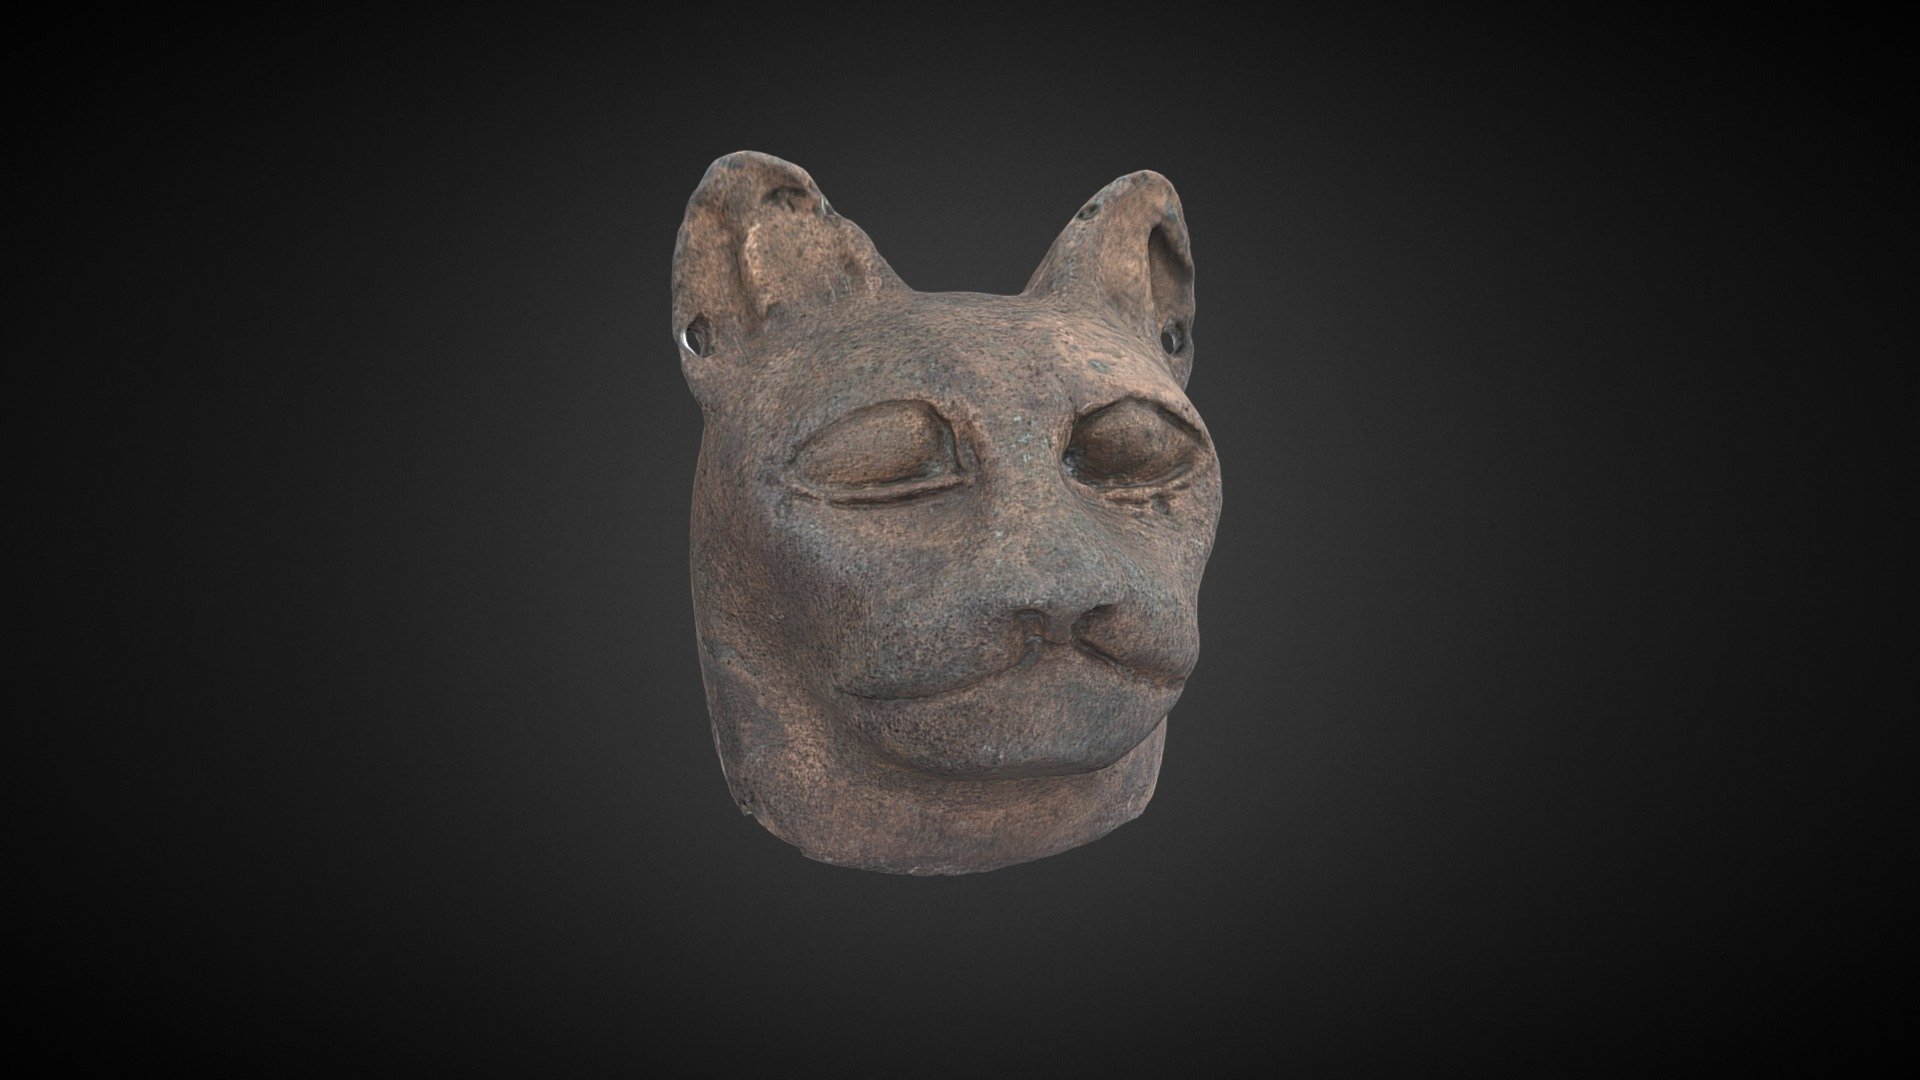 A small ancient Egyptian cat head made of a copper alloy from the collection of Bolton Library and Museum Services. The head is unprovenanced, but these objects are particularly well-attested at the sites of Bubastis and Saqqara. In ancient Egypt, the cat was associated with the goddess Bastet, and many objects like this were created to be given in offering at temples and necropoli. 

This cat head features pierced ears and finely detailed eyes which may have held some form of inlay.

Accession Number: BOLMG:1969.8.A, Bolton Library and Museum Services

Photography and Model Credit: Ian Trumble, Bolton Library and Museum Services

Texture Refinement: Charlotte Sargent

Produced as part of a training workshop for Museums of the North West Photogrammetry Hub: Building Virtual 3D Futures. Learn more here 3d model